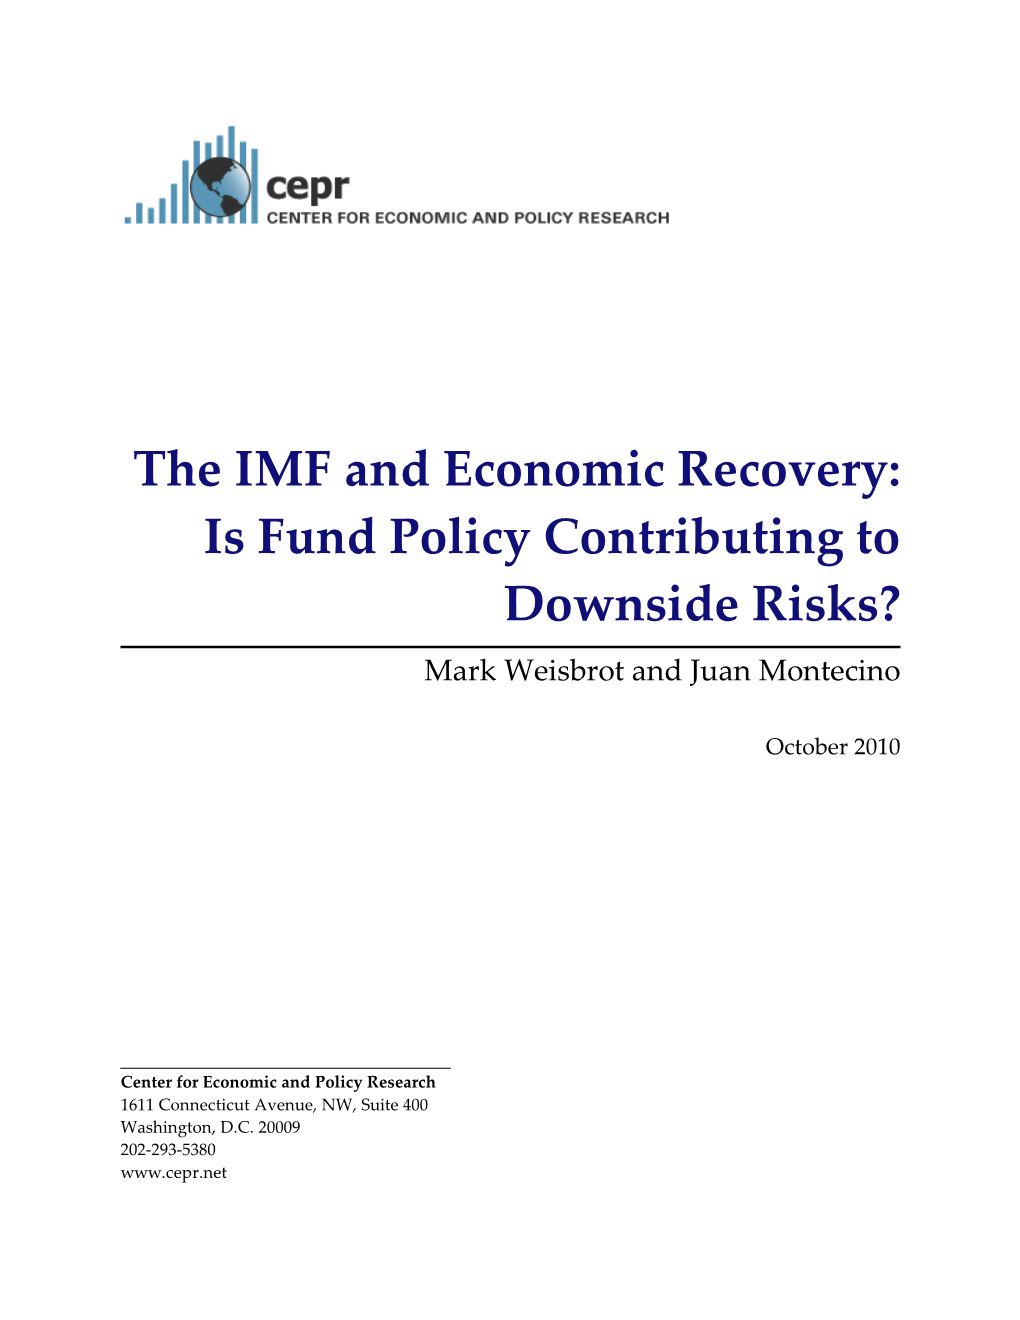 The IMF and Economic Recovery: Is Fund Policy Contributing to Downside Risks? Mark Weisbrot and Juan Montecino